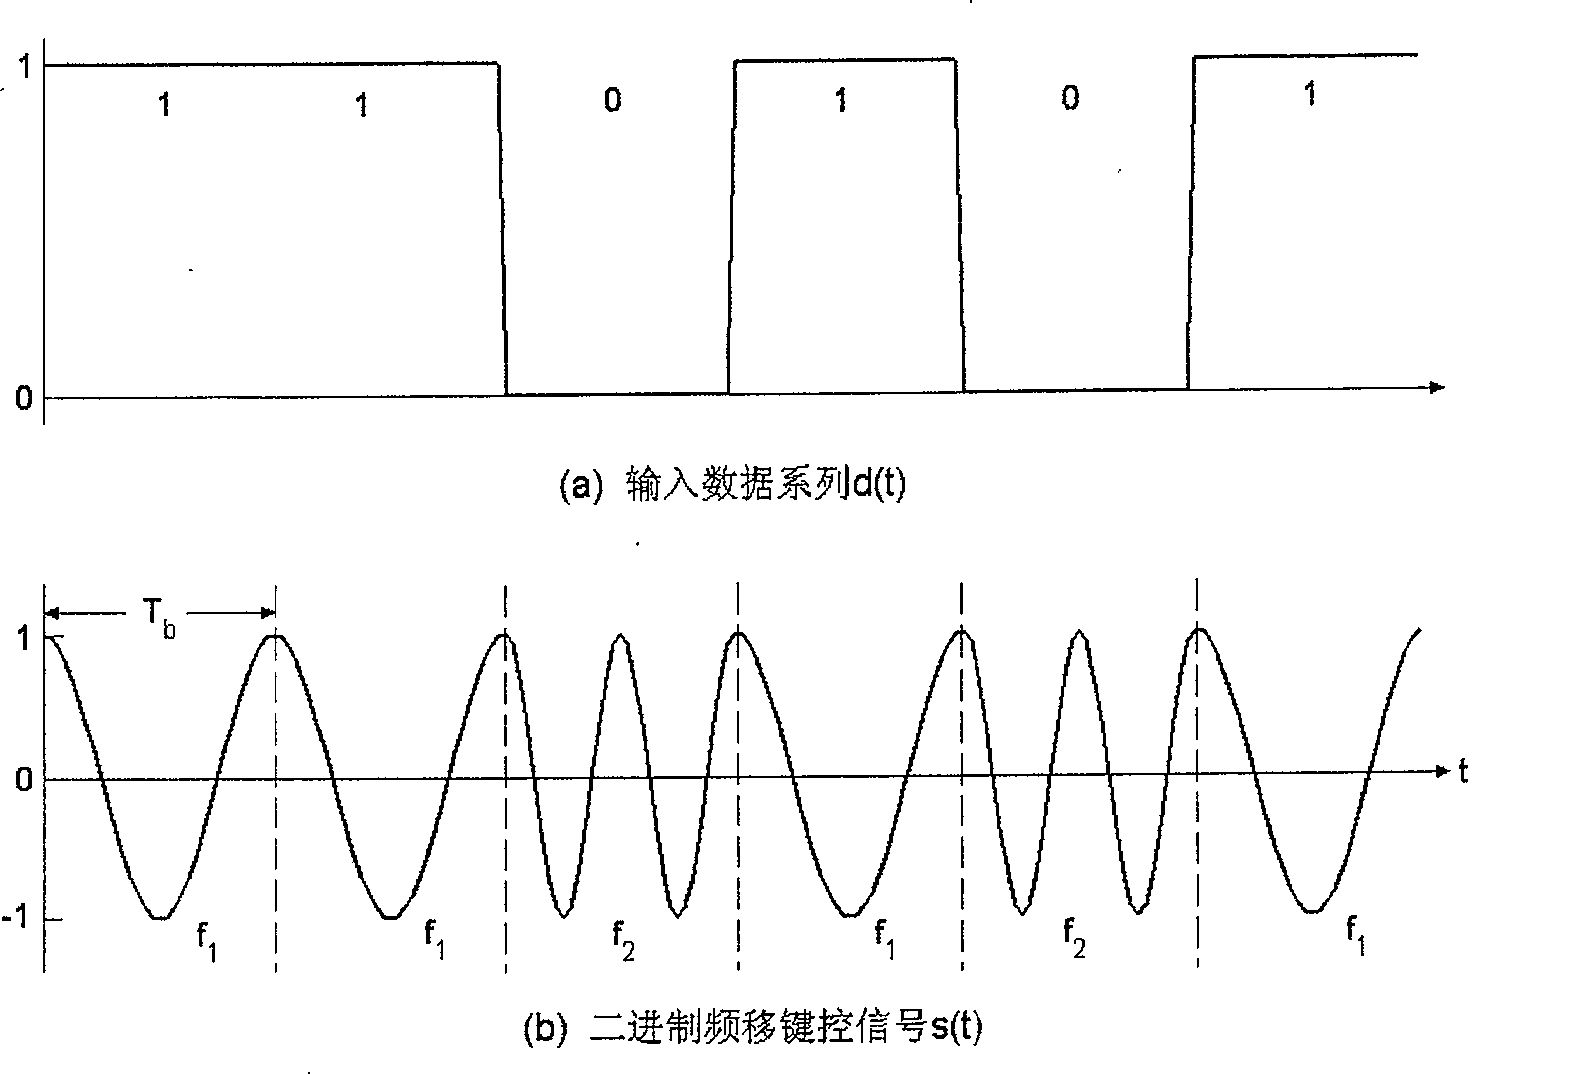 Digital remodulation and digital remodulating method for binary frequency shift keying signal